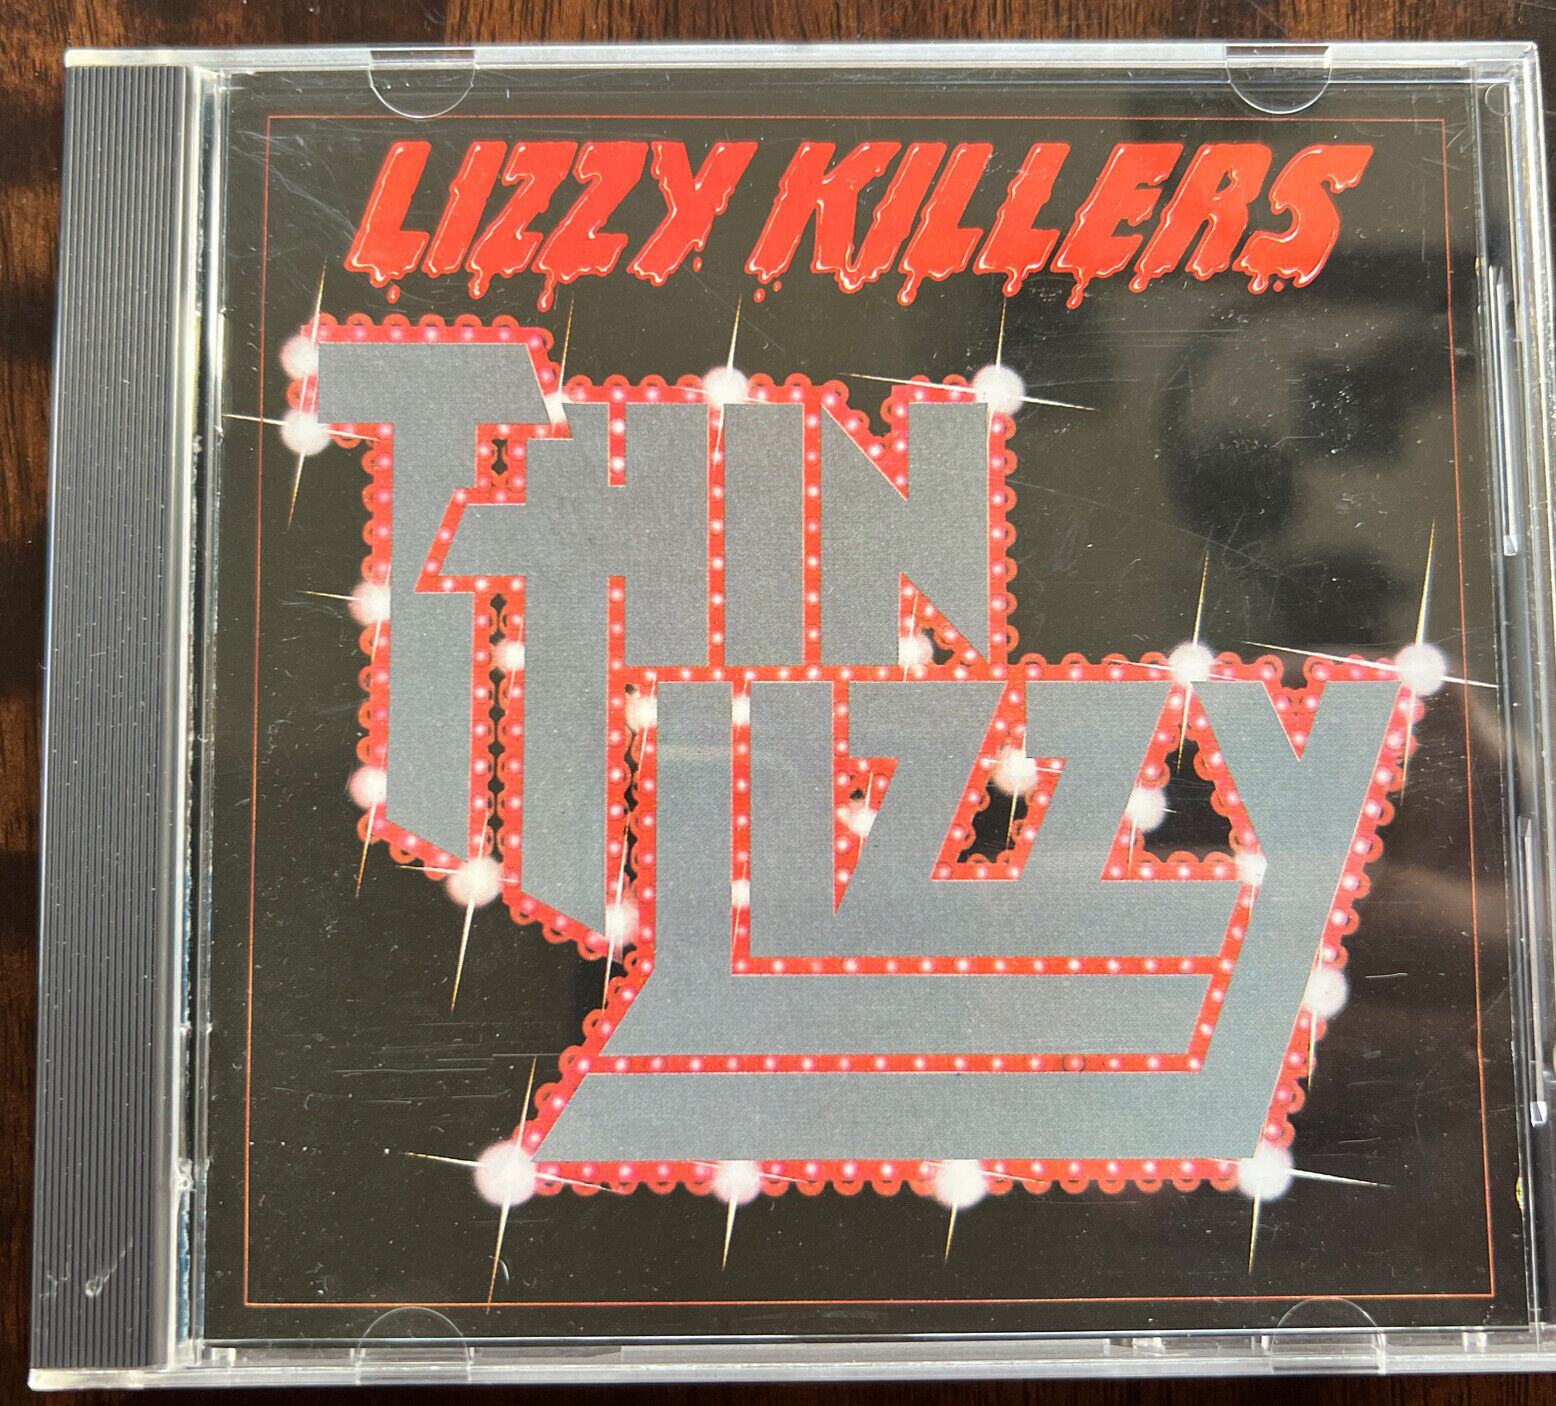 Thin Lizzy: Lizzy Killers (CD, German Import)